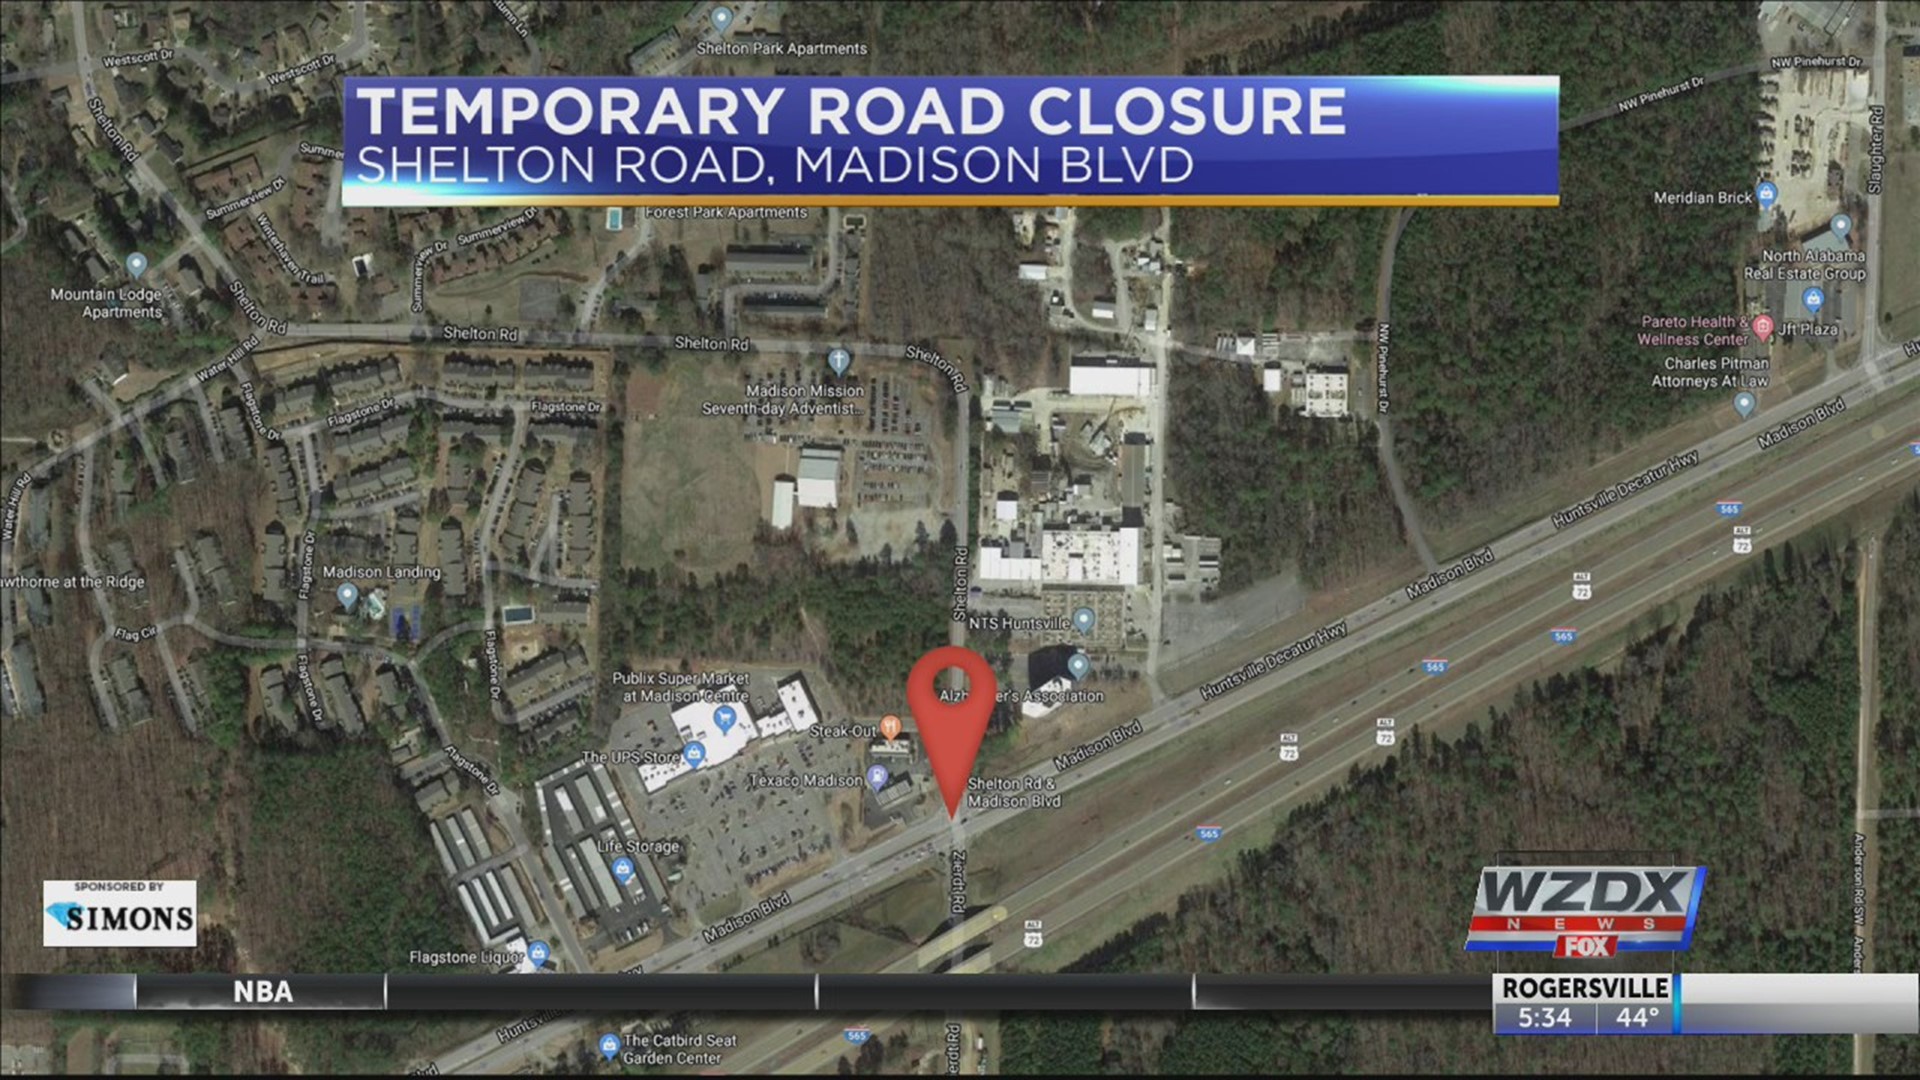 Starting Saturday, January 25, drivers can expect to see a road closure on Shelton Road, just north of Madison Boulevard.